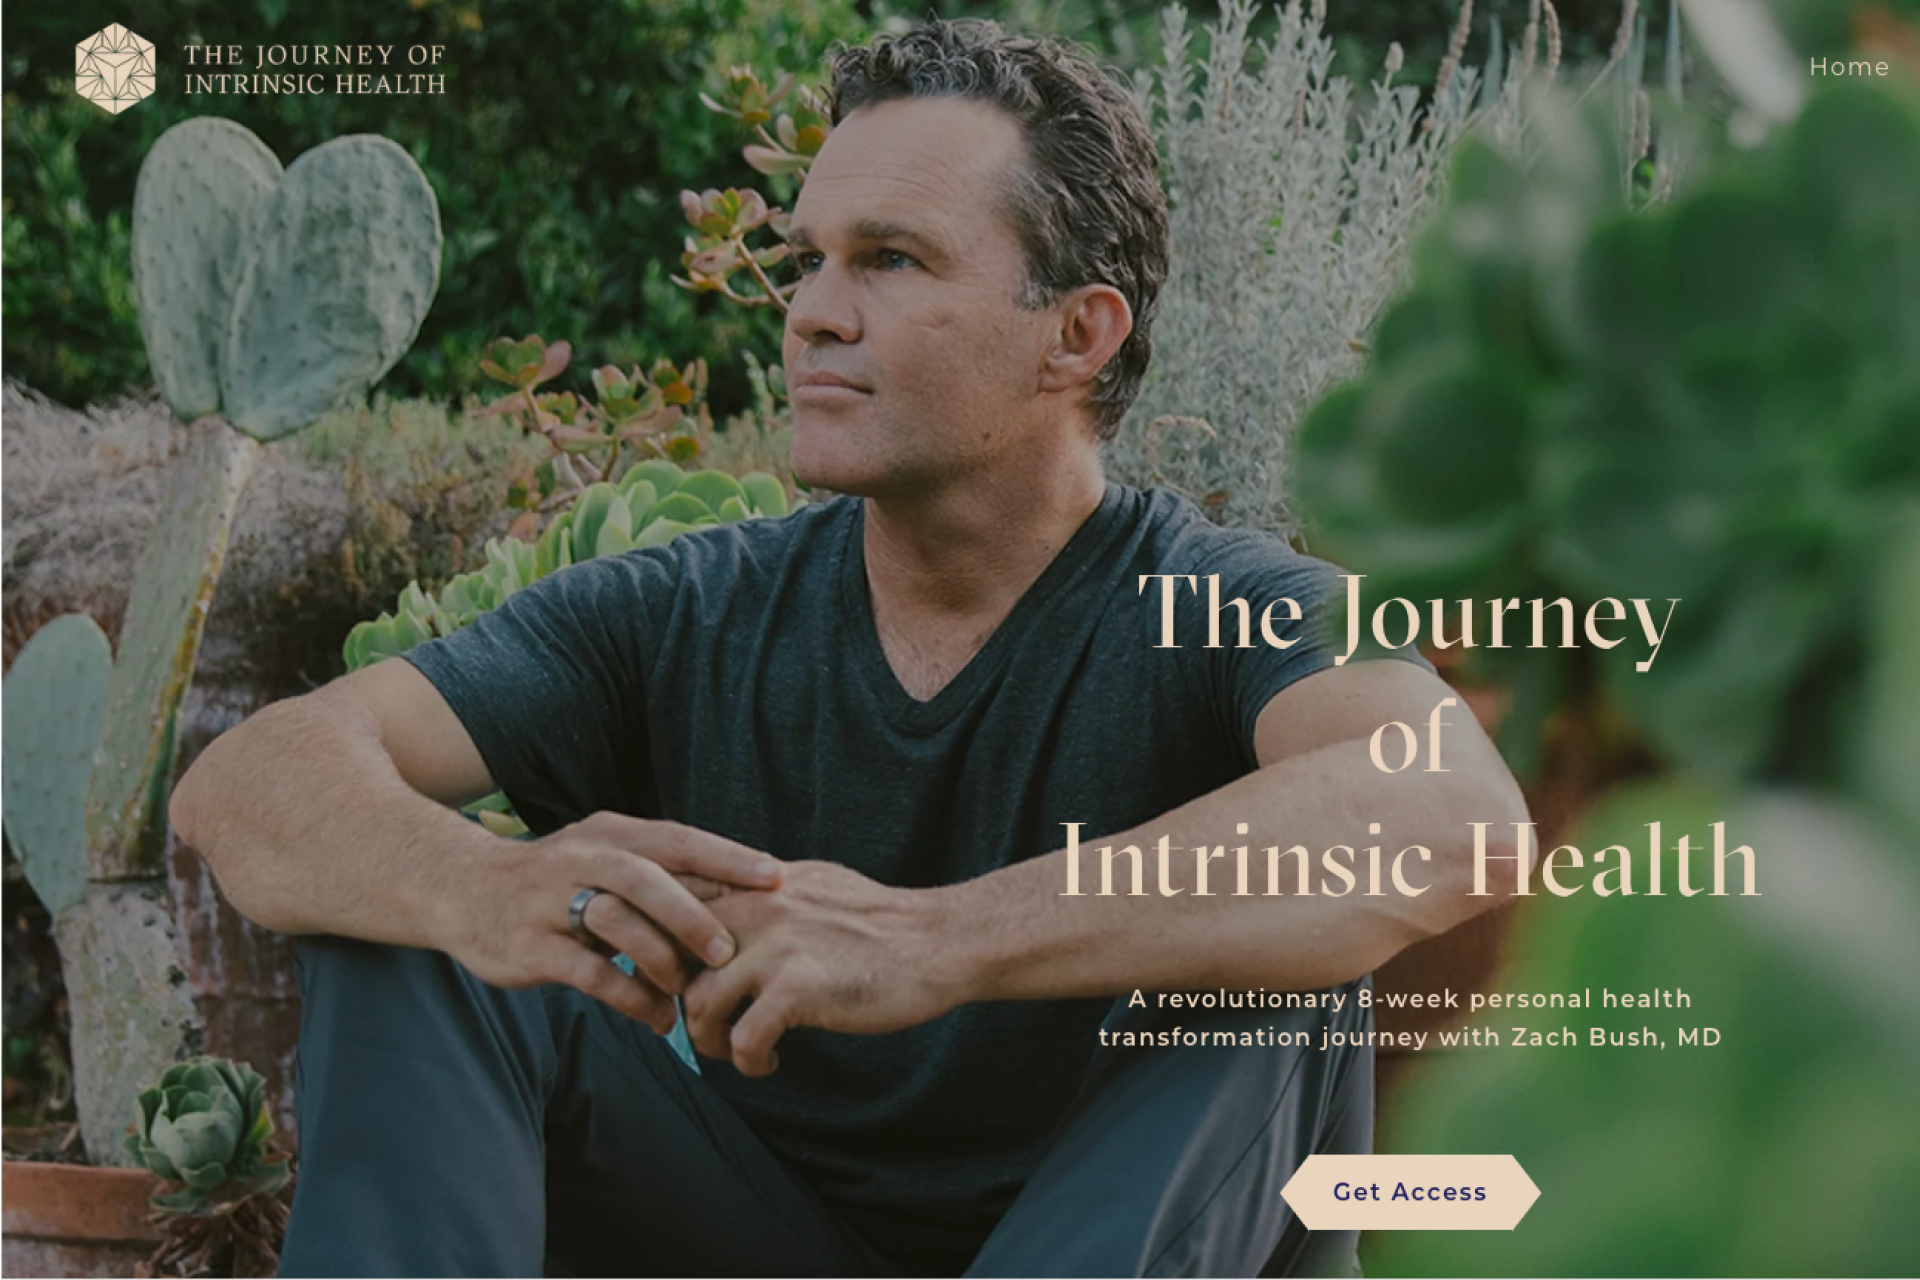 The Journey of Intrinsic Health